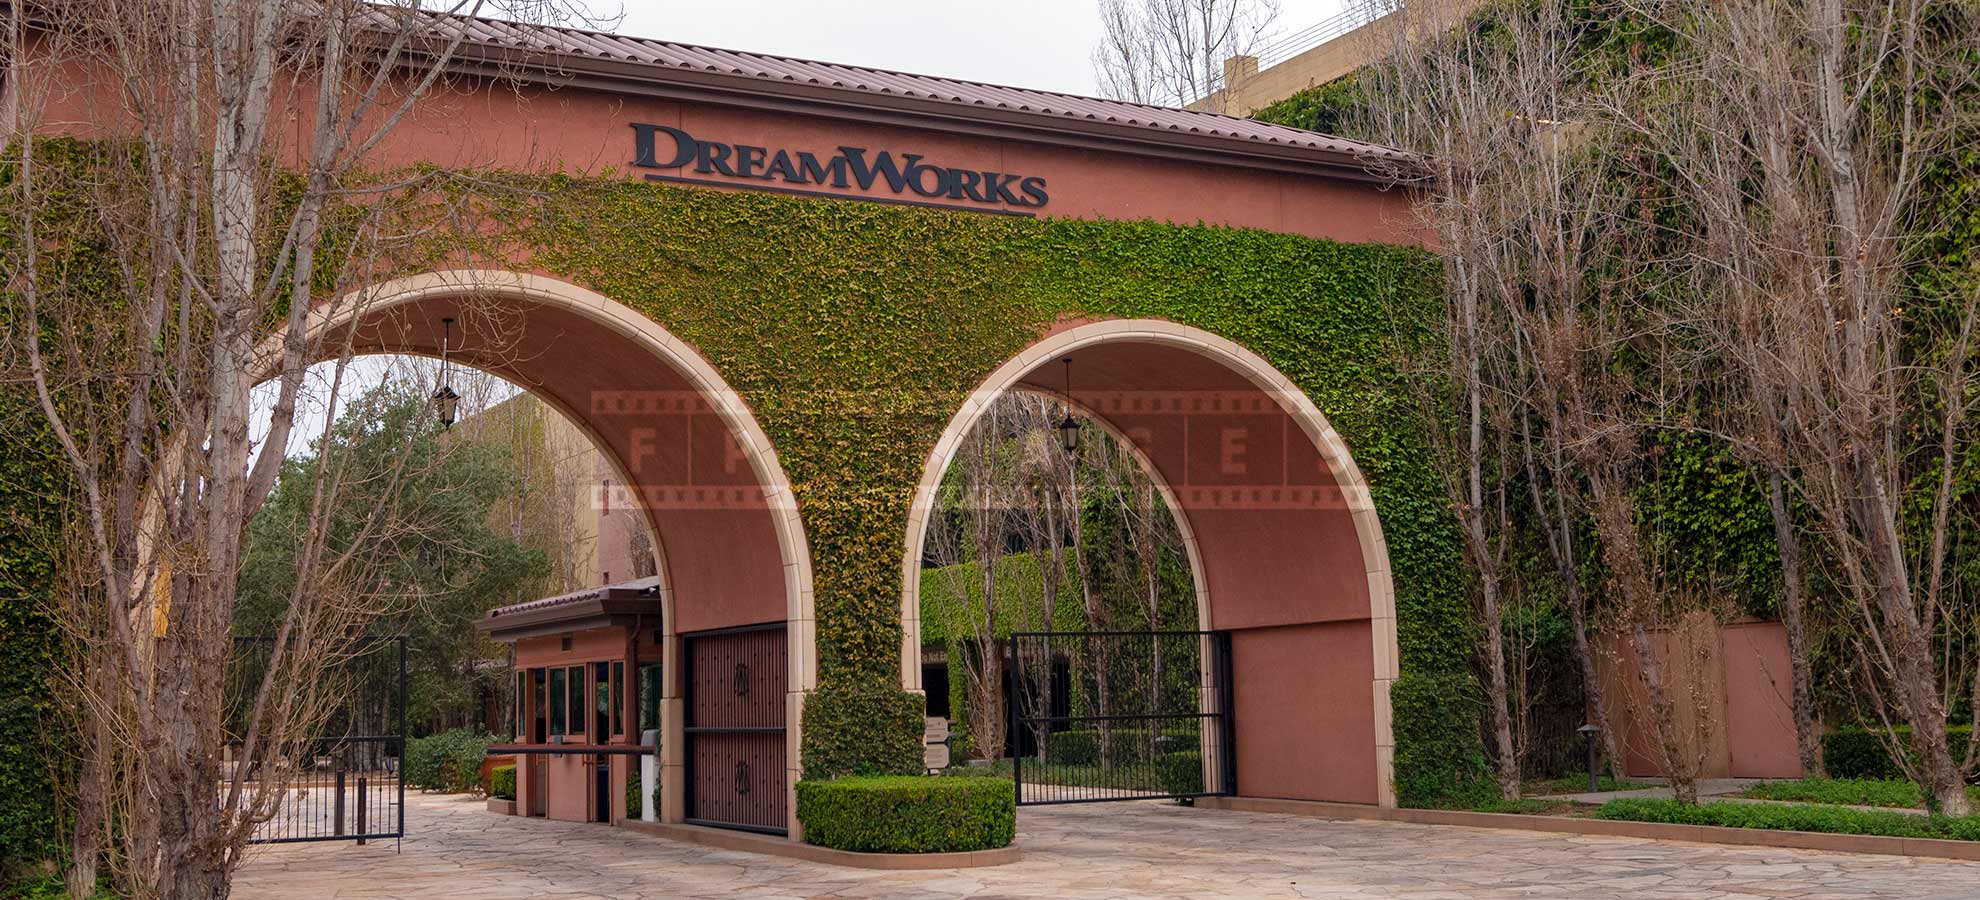 A Glimpse of the DreamWorks Animation Studios